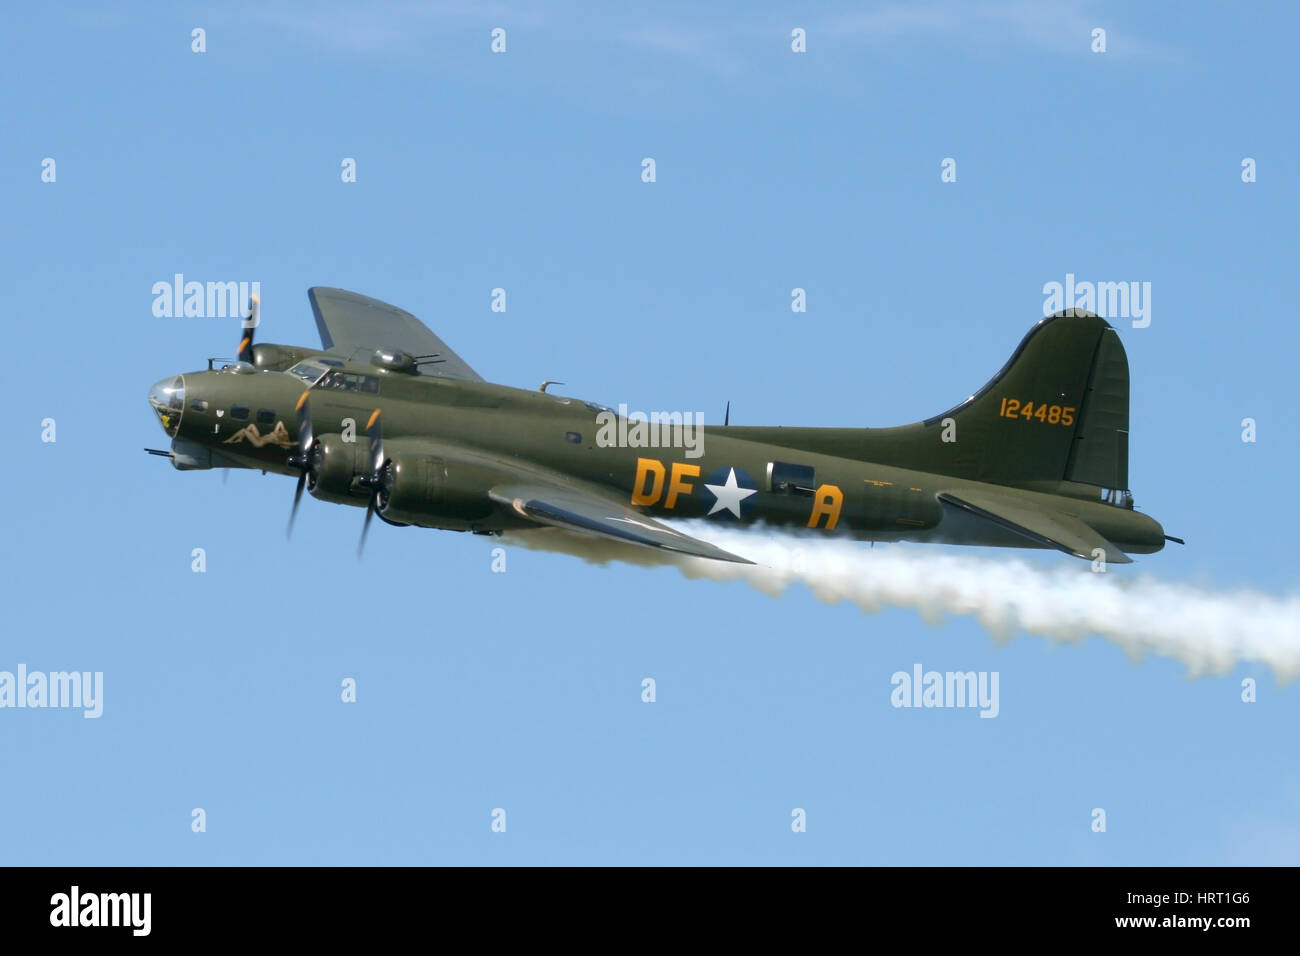 The UK's, and now also Europe's only airworthy B-17 with a flypast at a Rougham Airshow in Suffolk. The smoke is simulated battle damage. Stock Photo